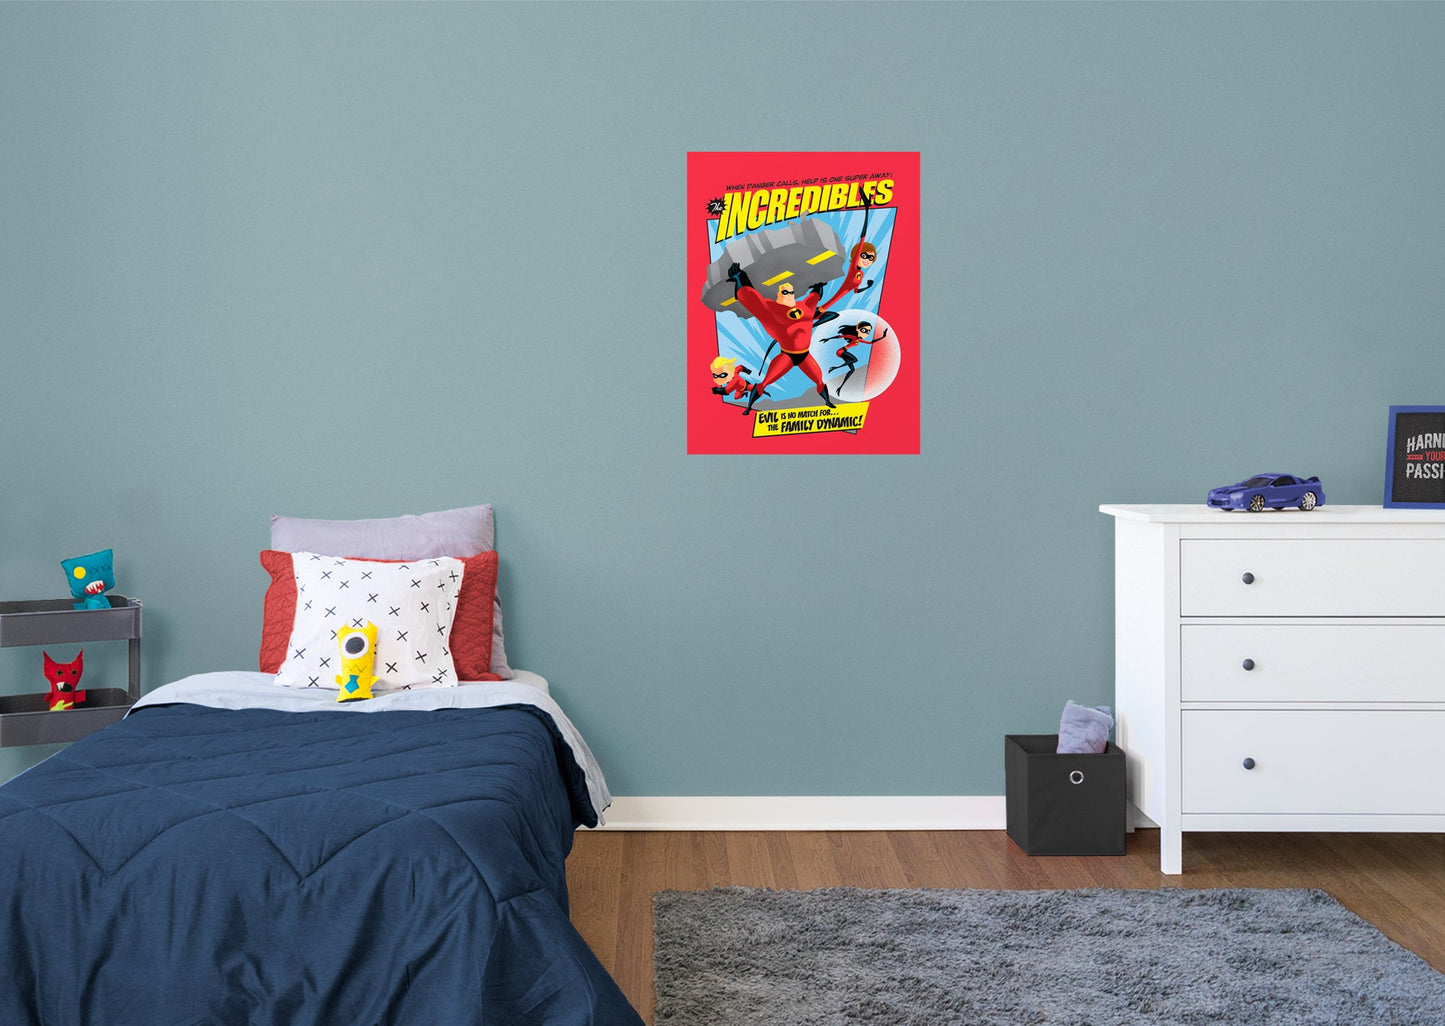 The Incredibles:  Evil Is No Match Mural        - Officially Licensed Disney Removable Wall   Adhesive Decal